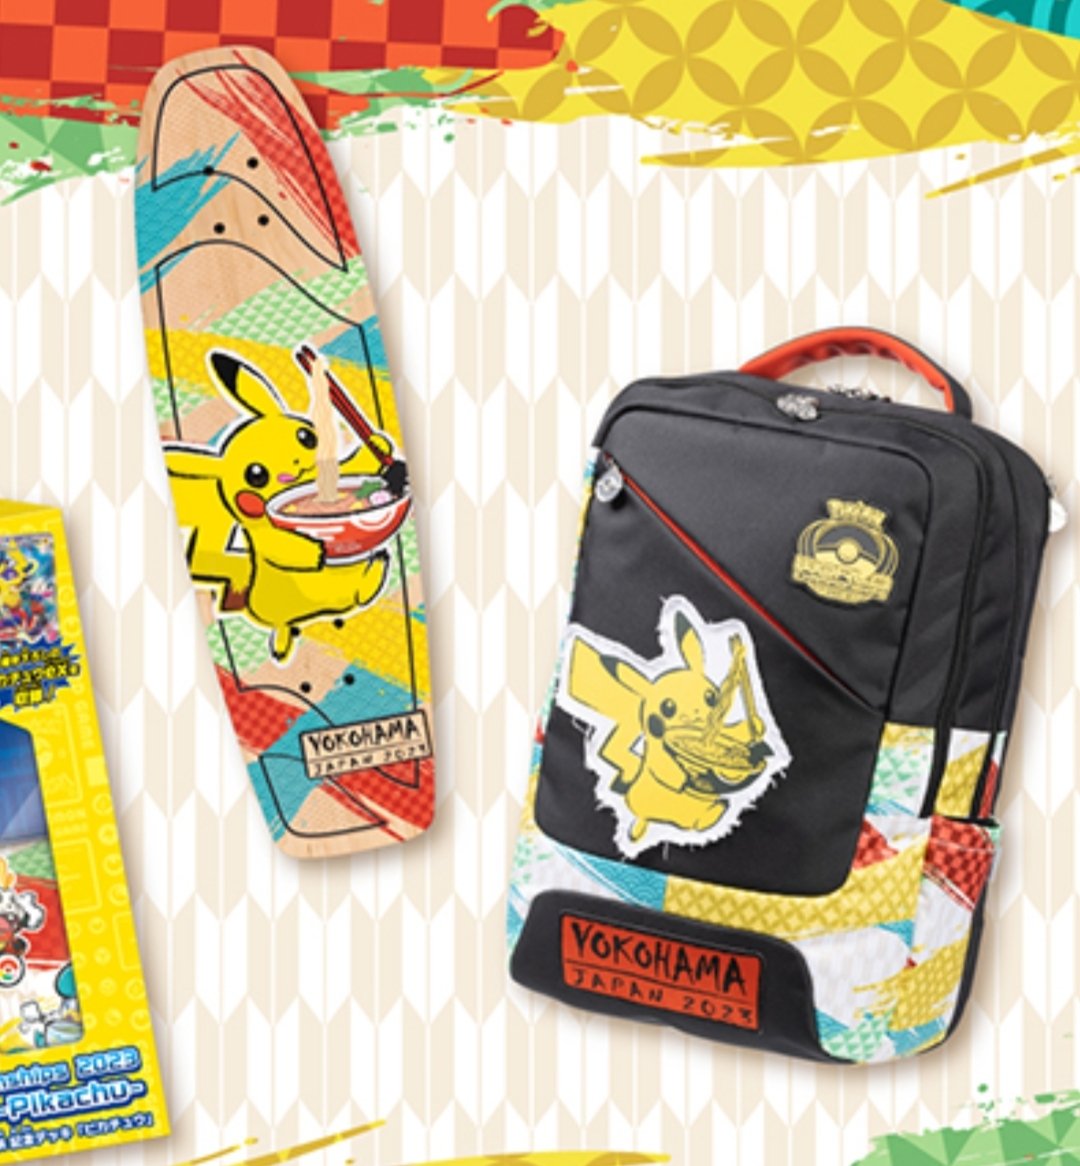 Worlds bags this year look sick. #PlayPokemon